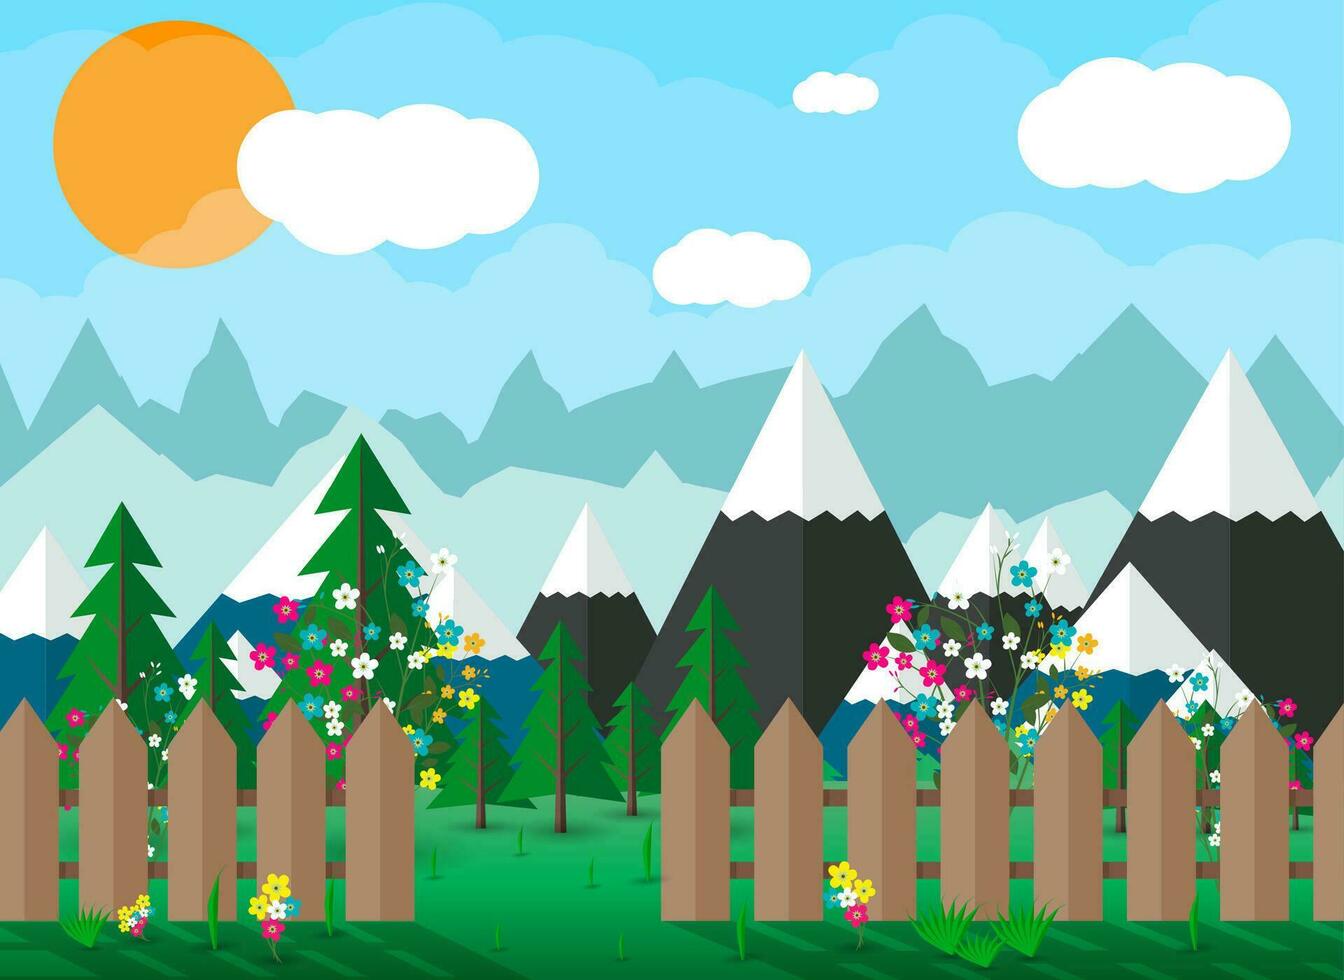 landscape of mountains, flowers, wooden fence, trees, blue sky with clouds and sun. vector illustration in flat style